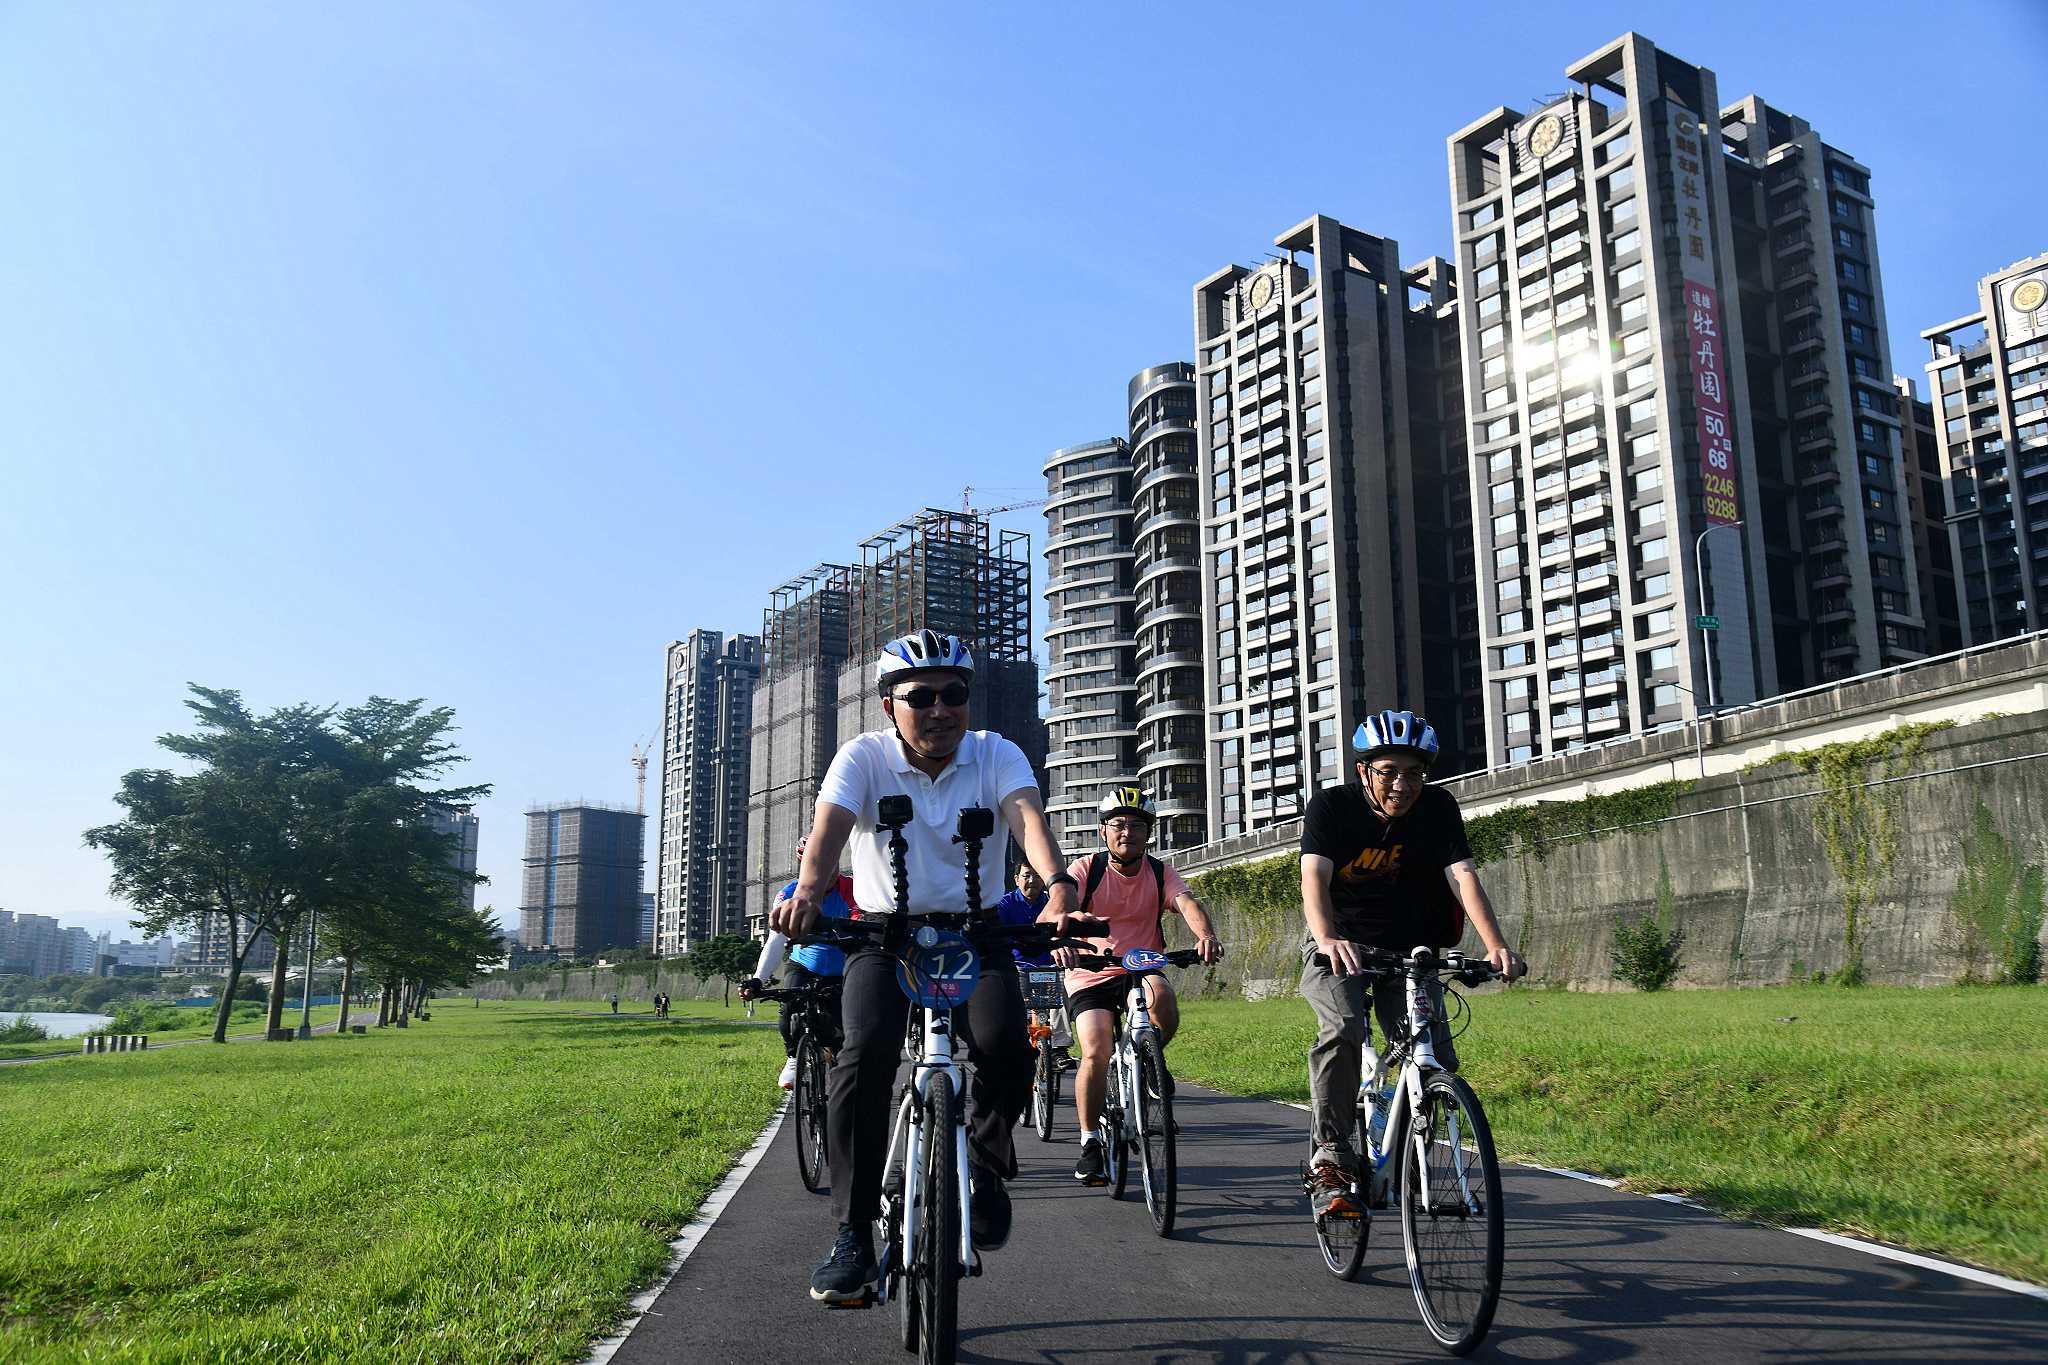 Hou Yu-Ih Experienced Bicycle Commuting to Encourage the Use of Green Modes of Transport in Citizens